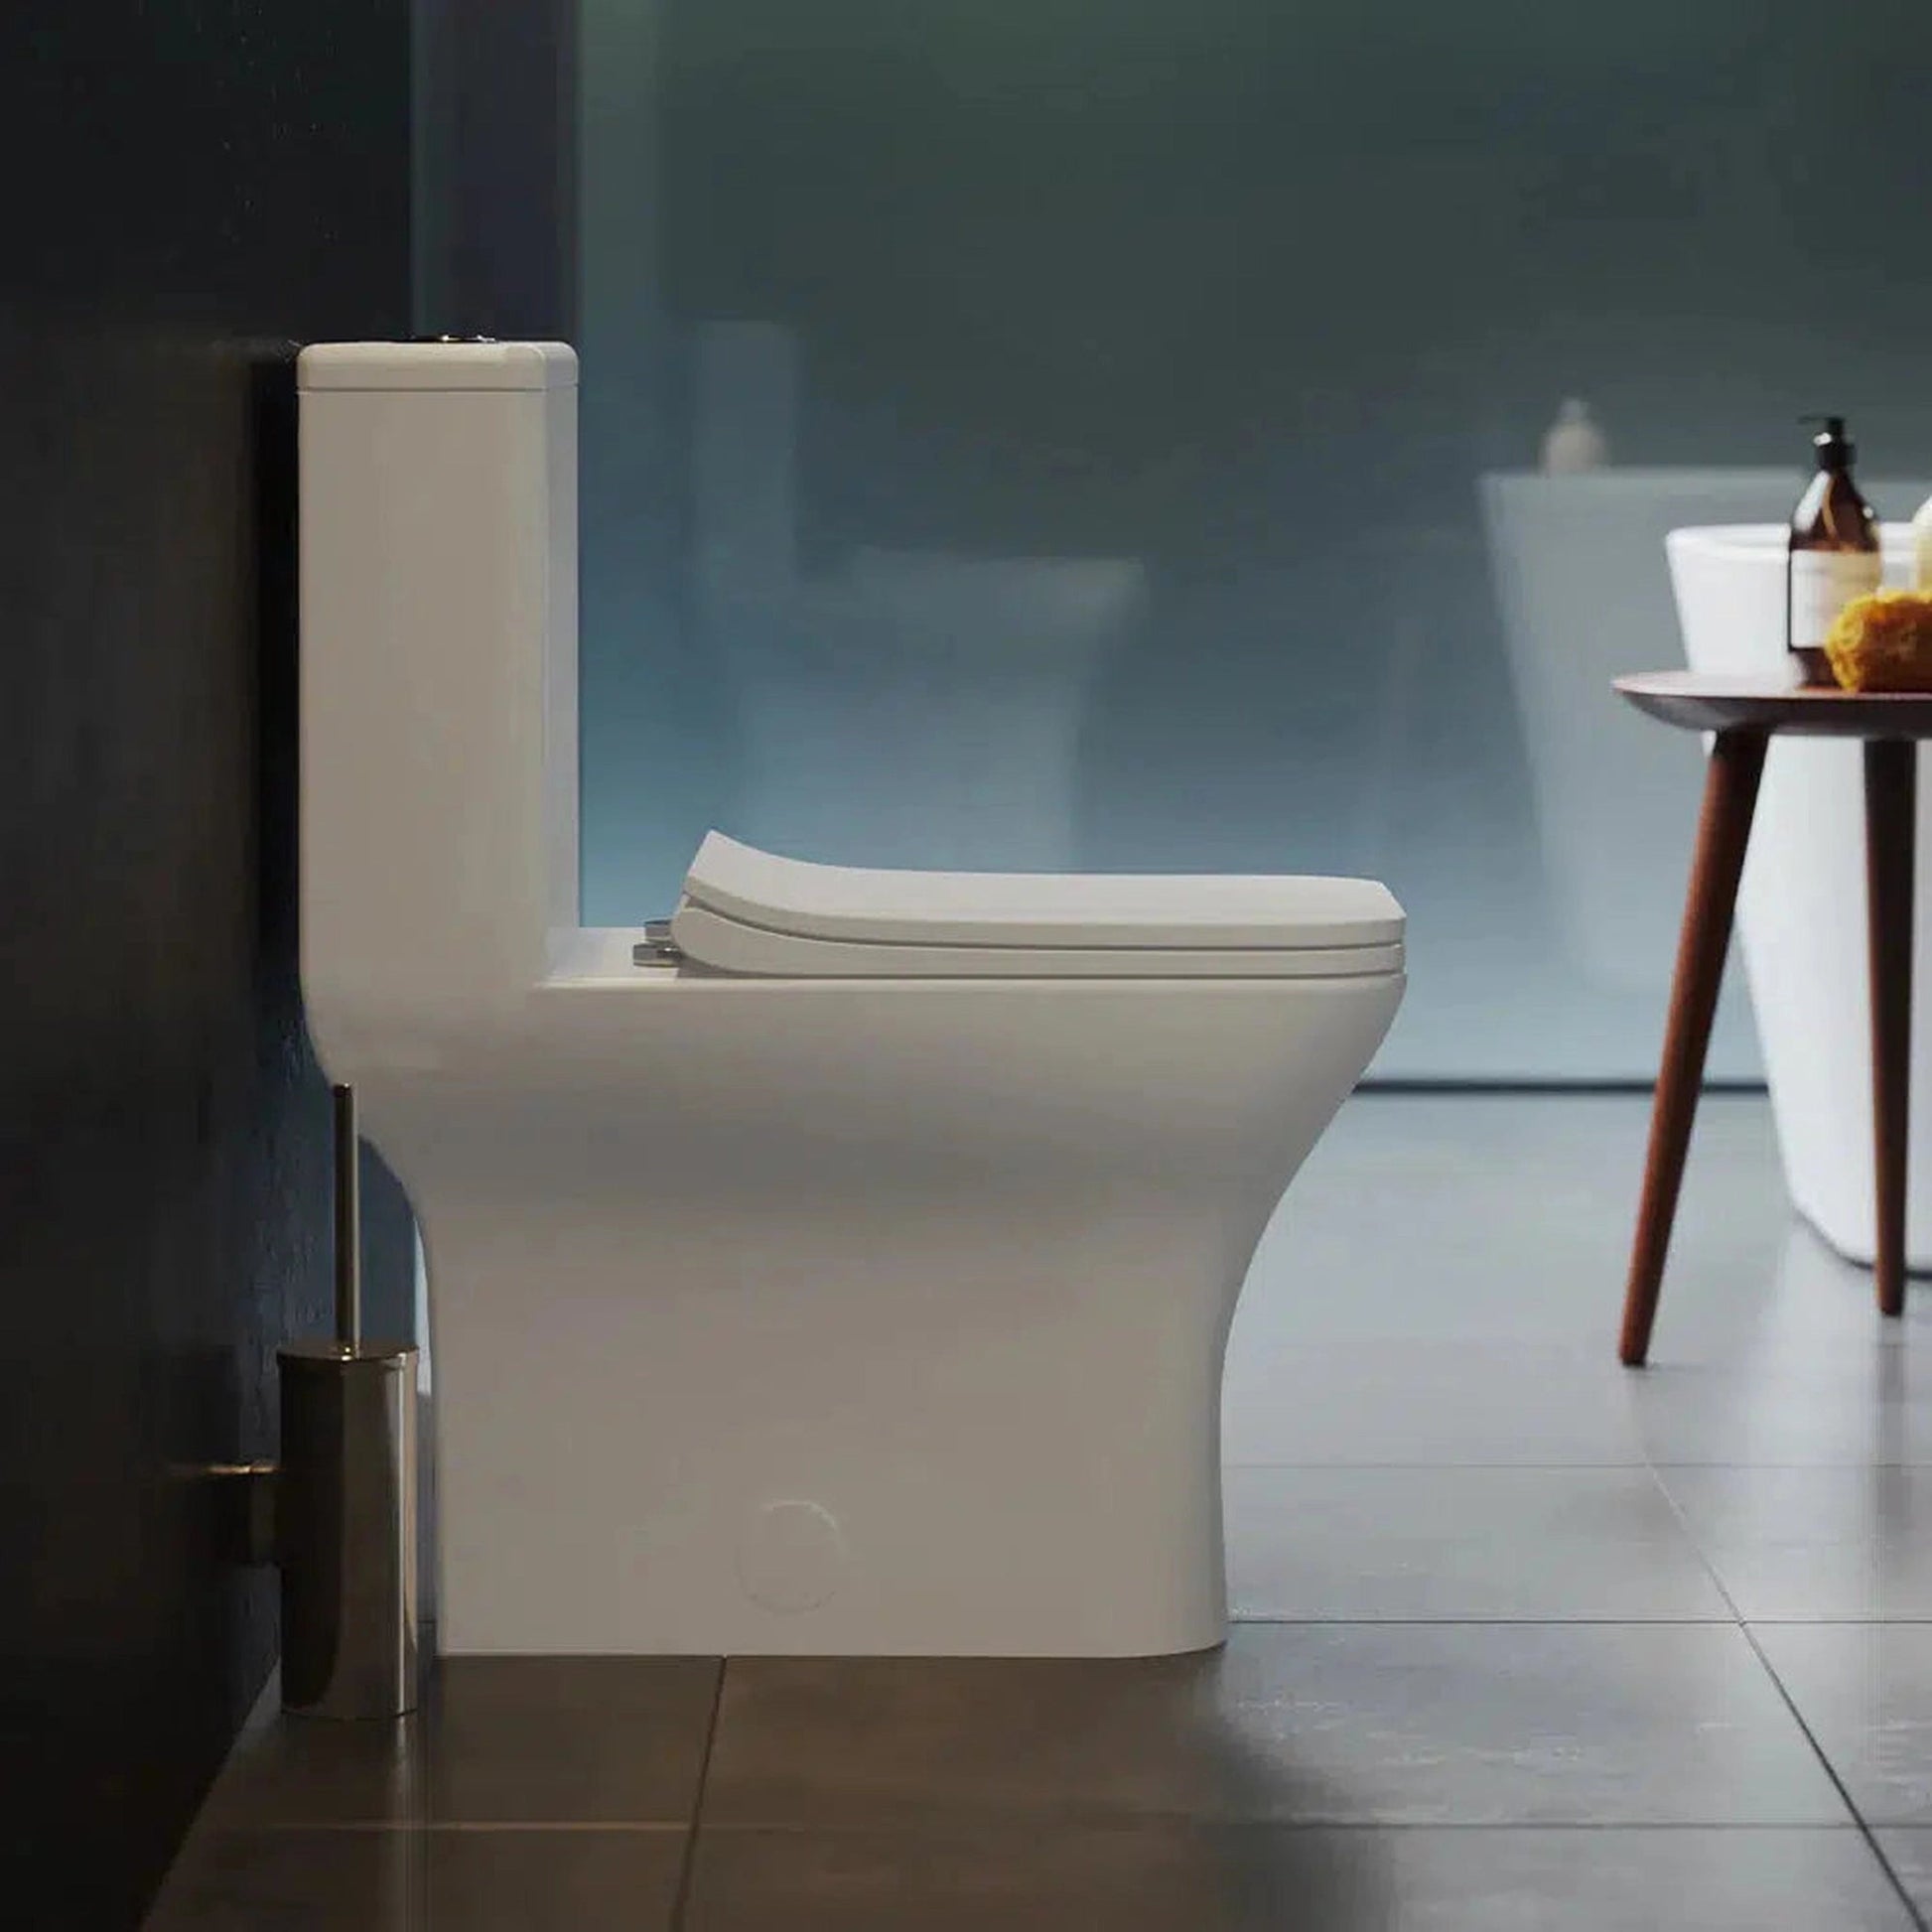 Swiss Madison Carré 15" x 30" One-Piece Glossy White Elongated Square Floor-Mounted Toilet With 1.1/1.6 GPF